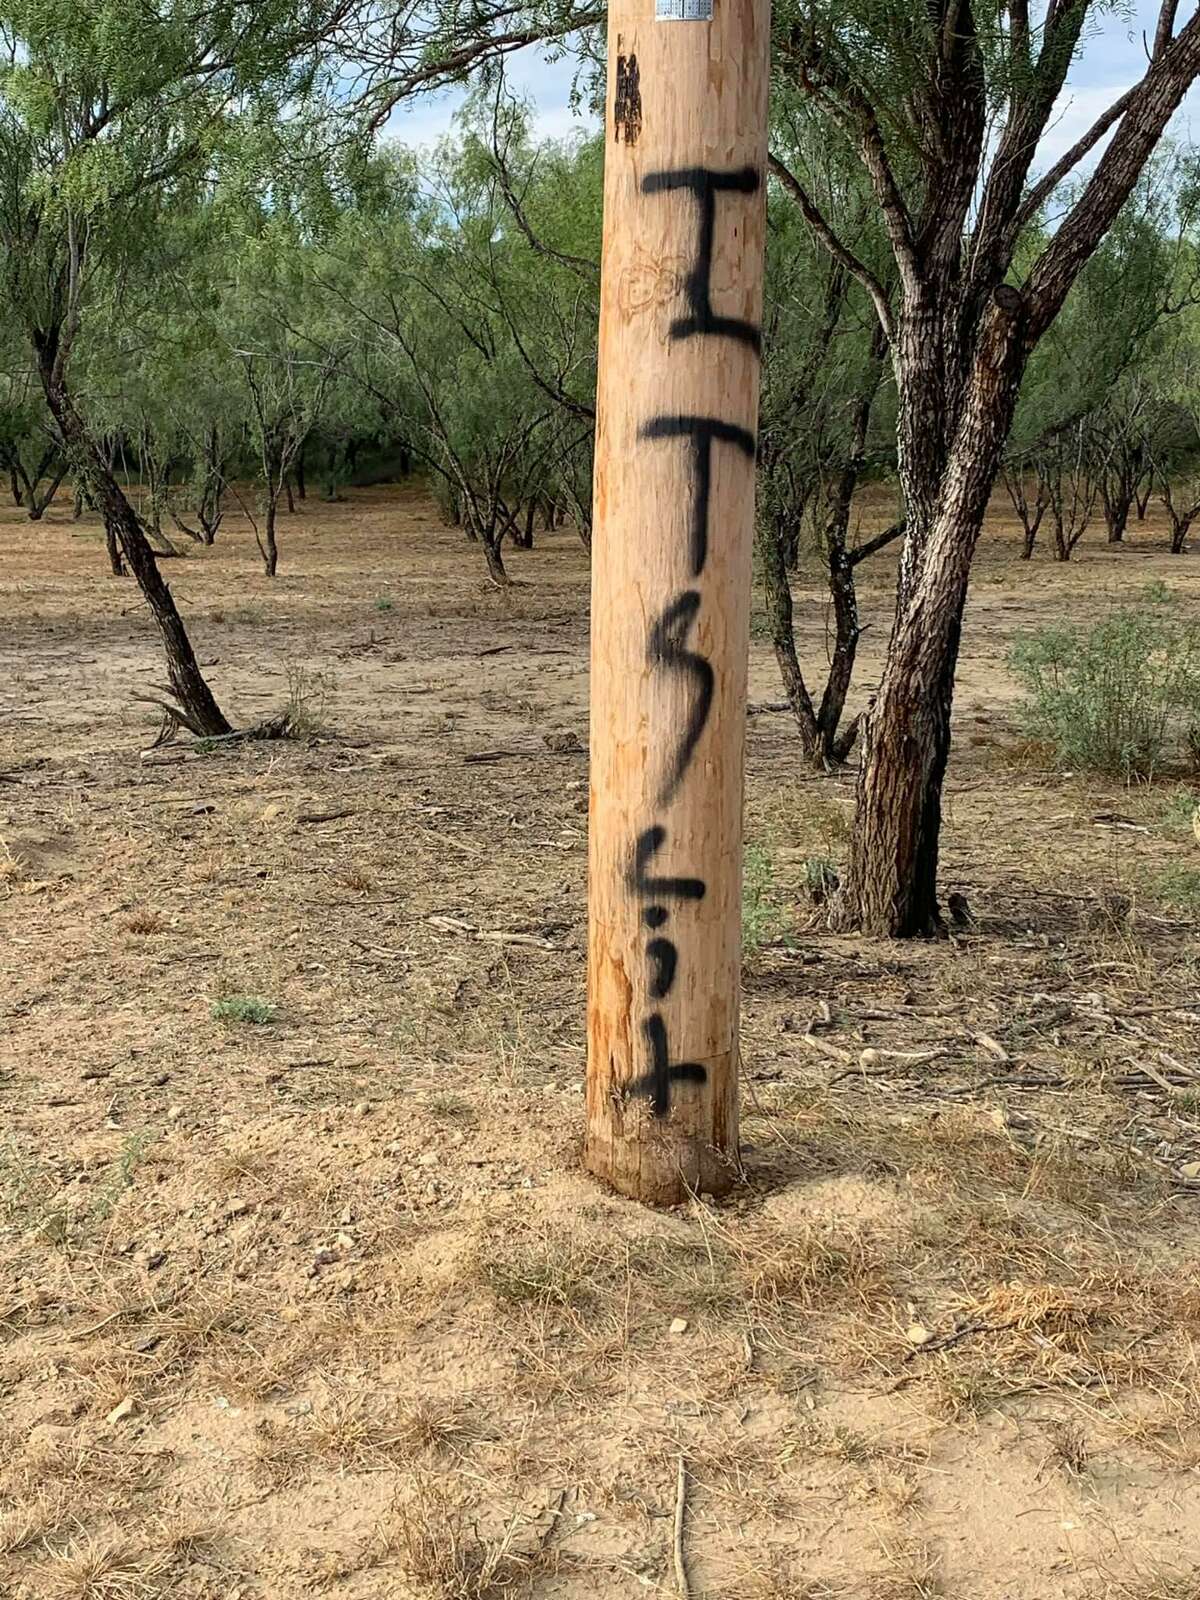 Law enforcement officials need the community’s help to identify the people responsible for vandalizing Las Misiones Park. To provide information on the case, call Laredo police at 795-2800 or Laredo Crime Stoppers at 727-TIPS (8477).